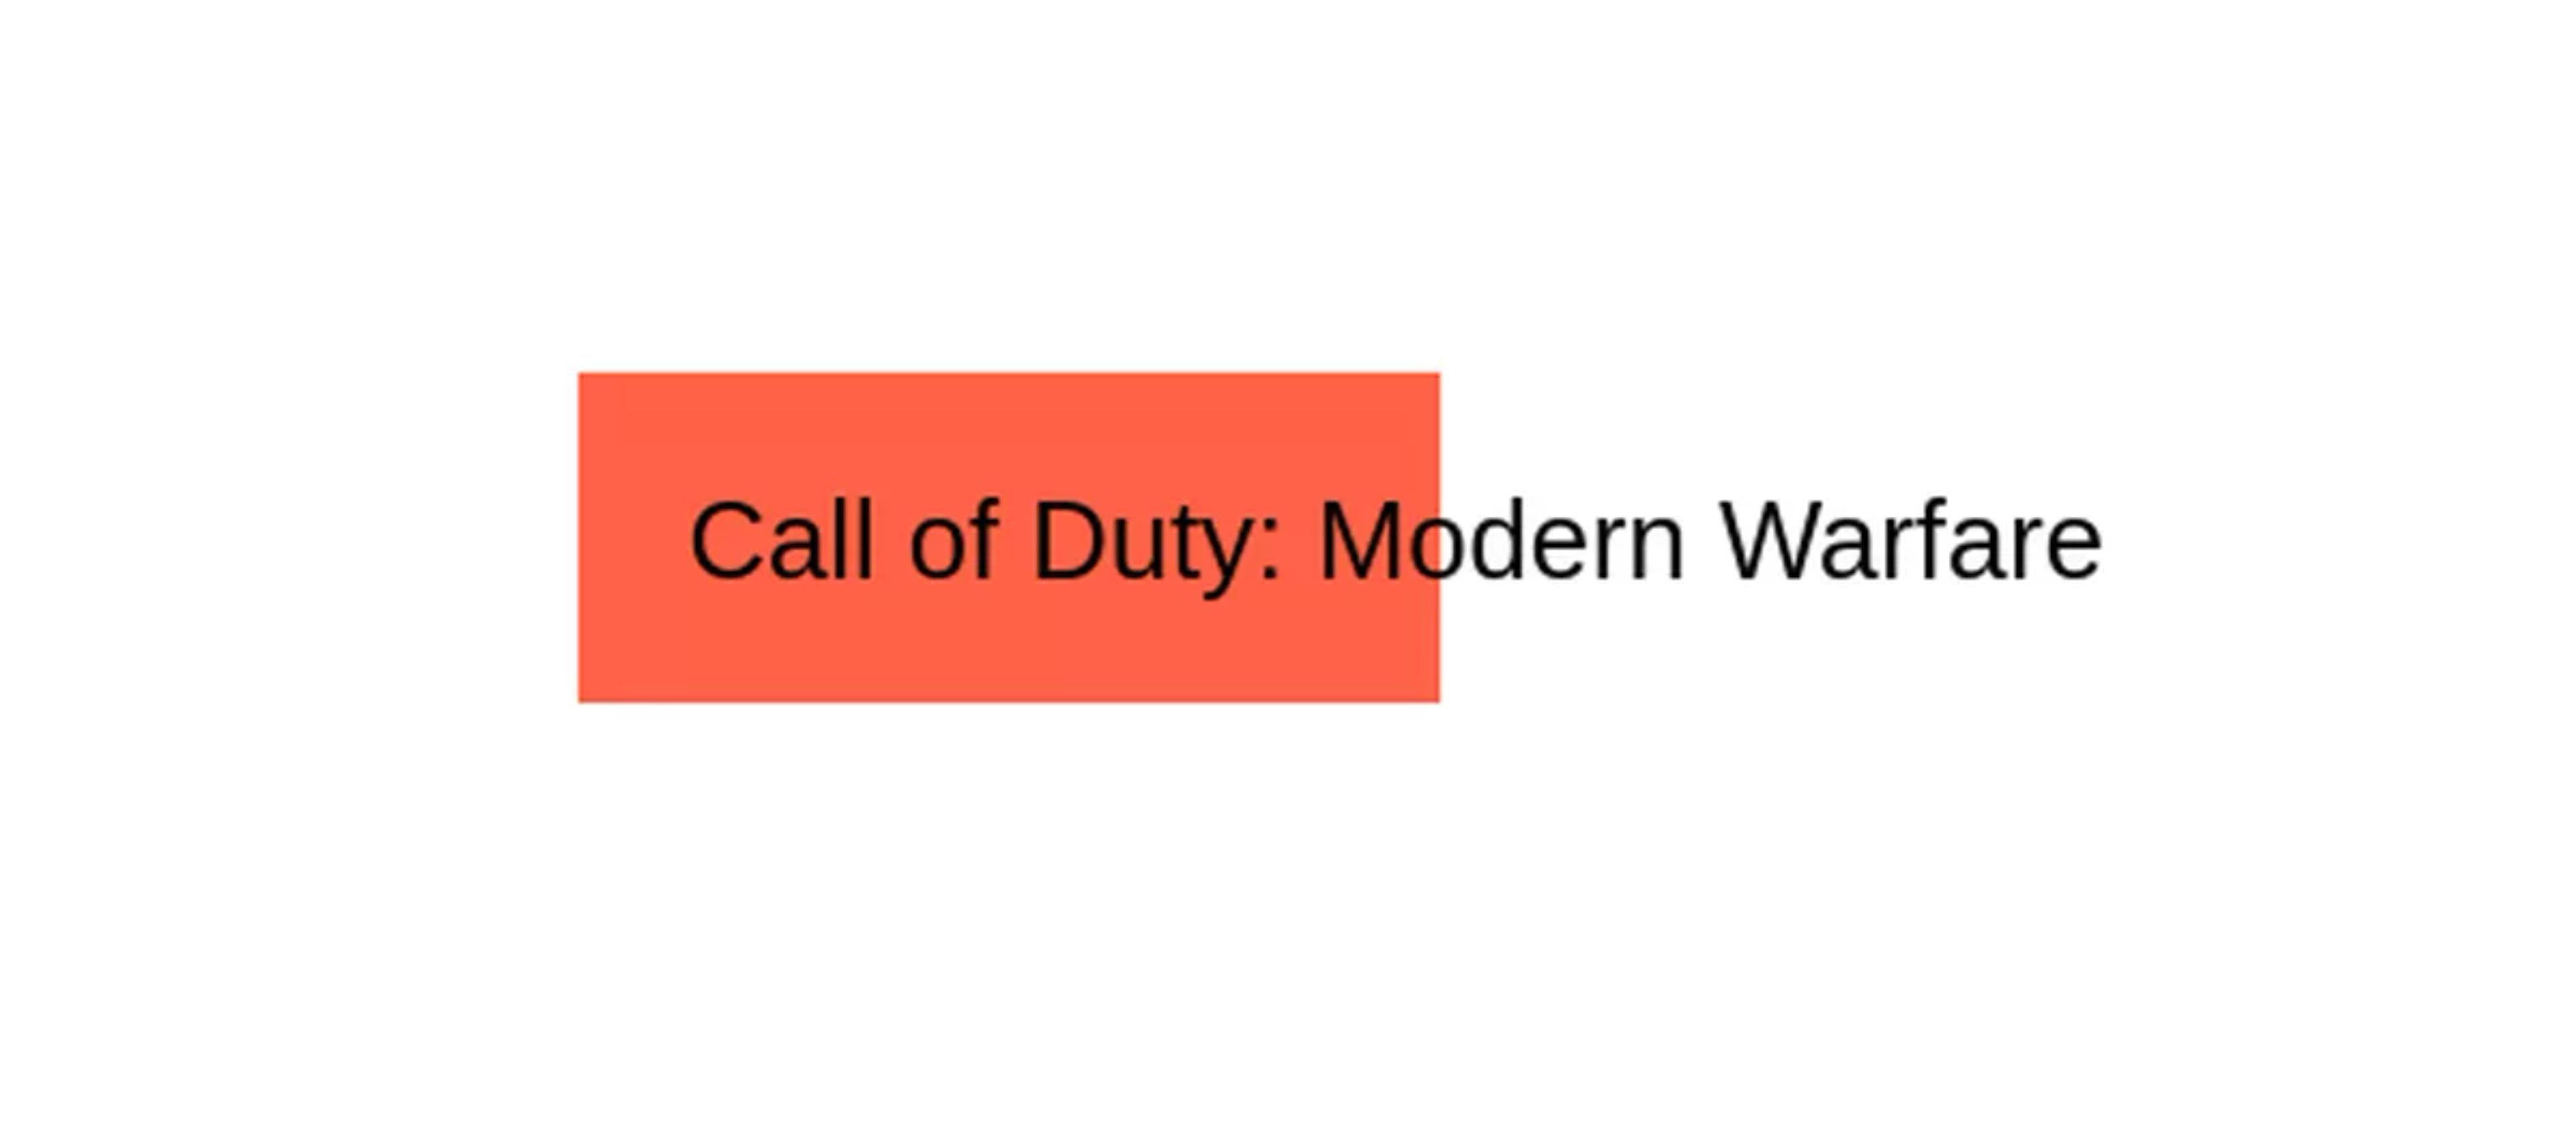 Box with the text, Call of Duty: Modern Warfare, Modern Warfare is sticking outside the box